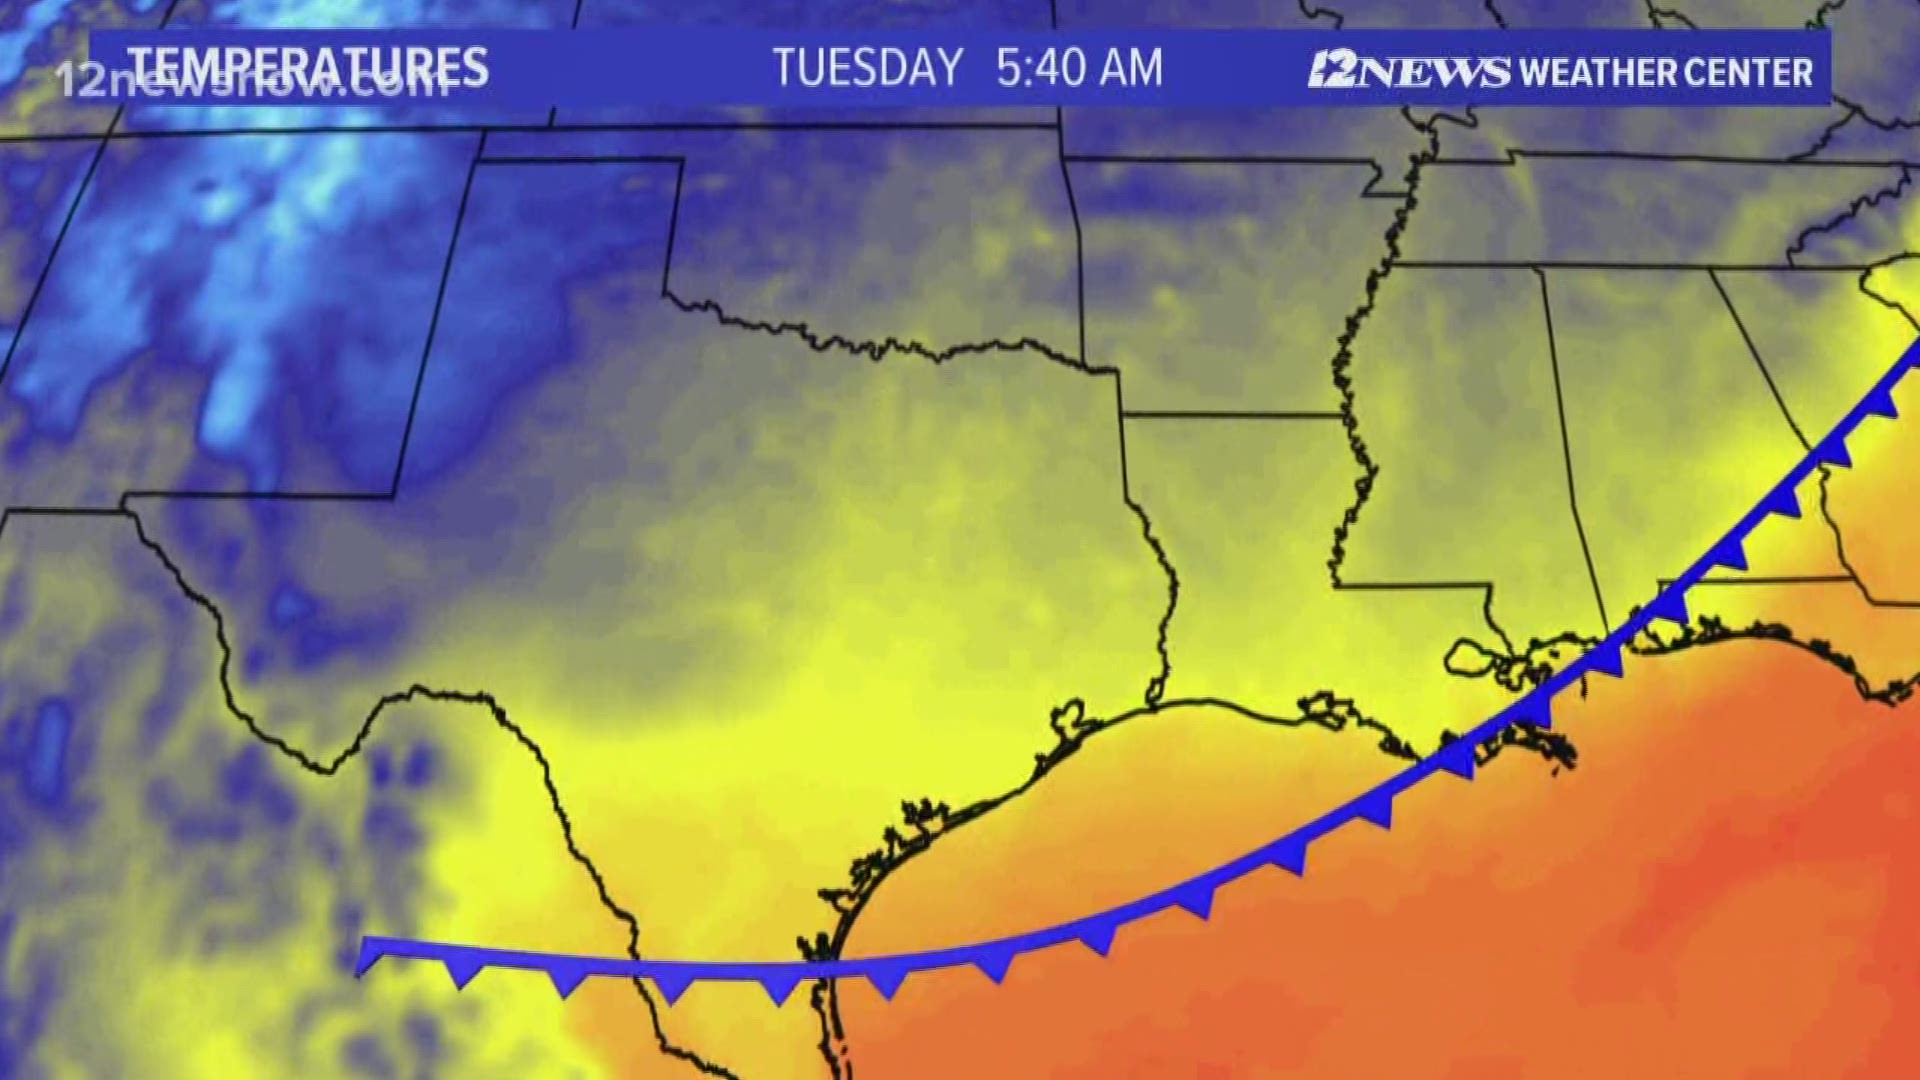 The front could bring temperatures in the fifties.